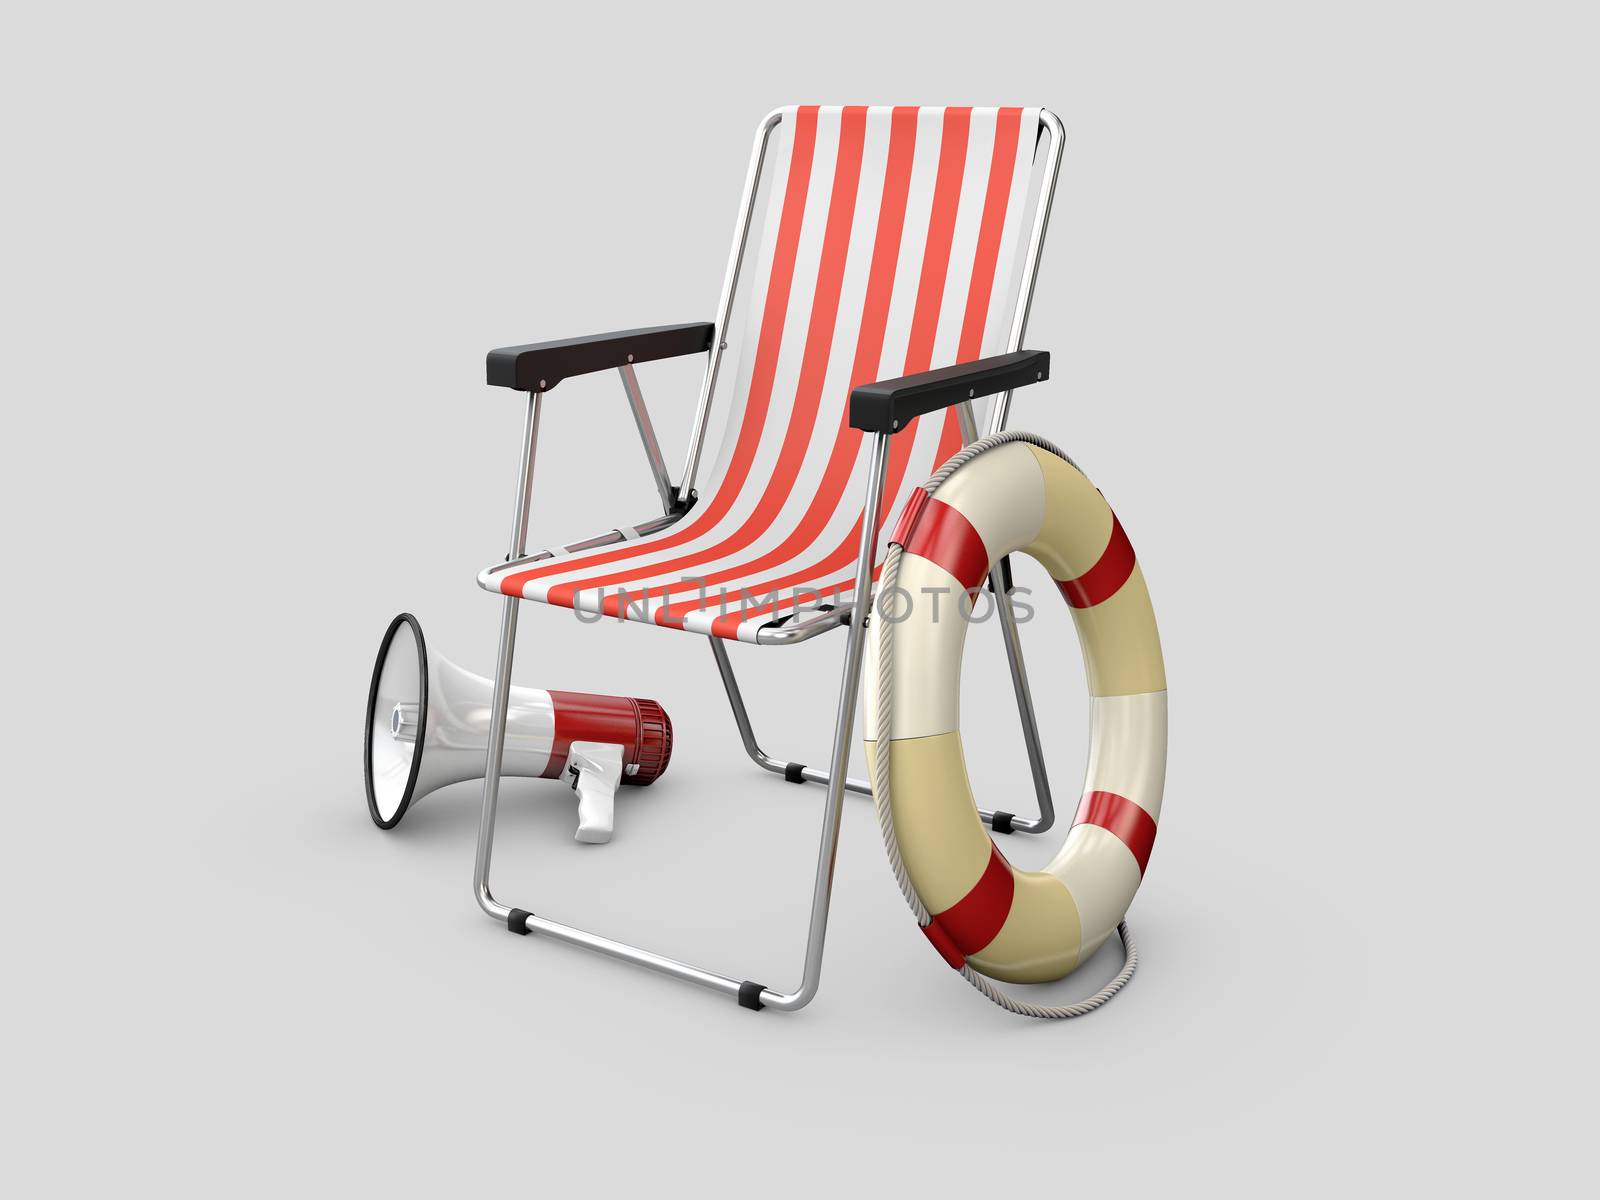 3d Illustration of Lifeguard chair with Lifebuoy and megaphone,isolated on gray background.